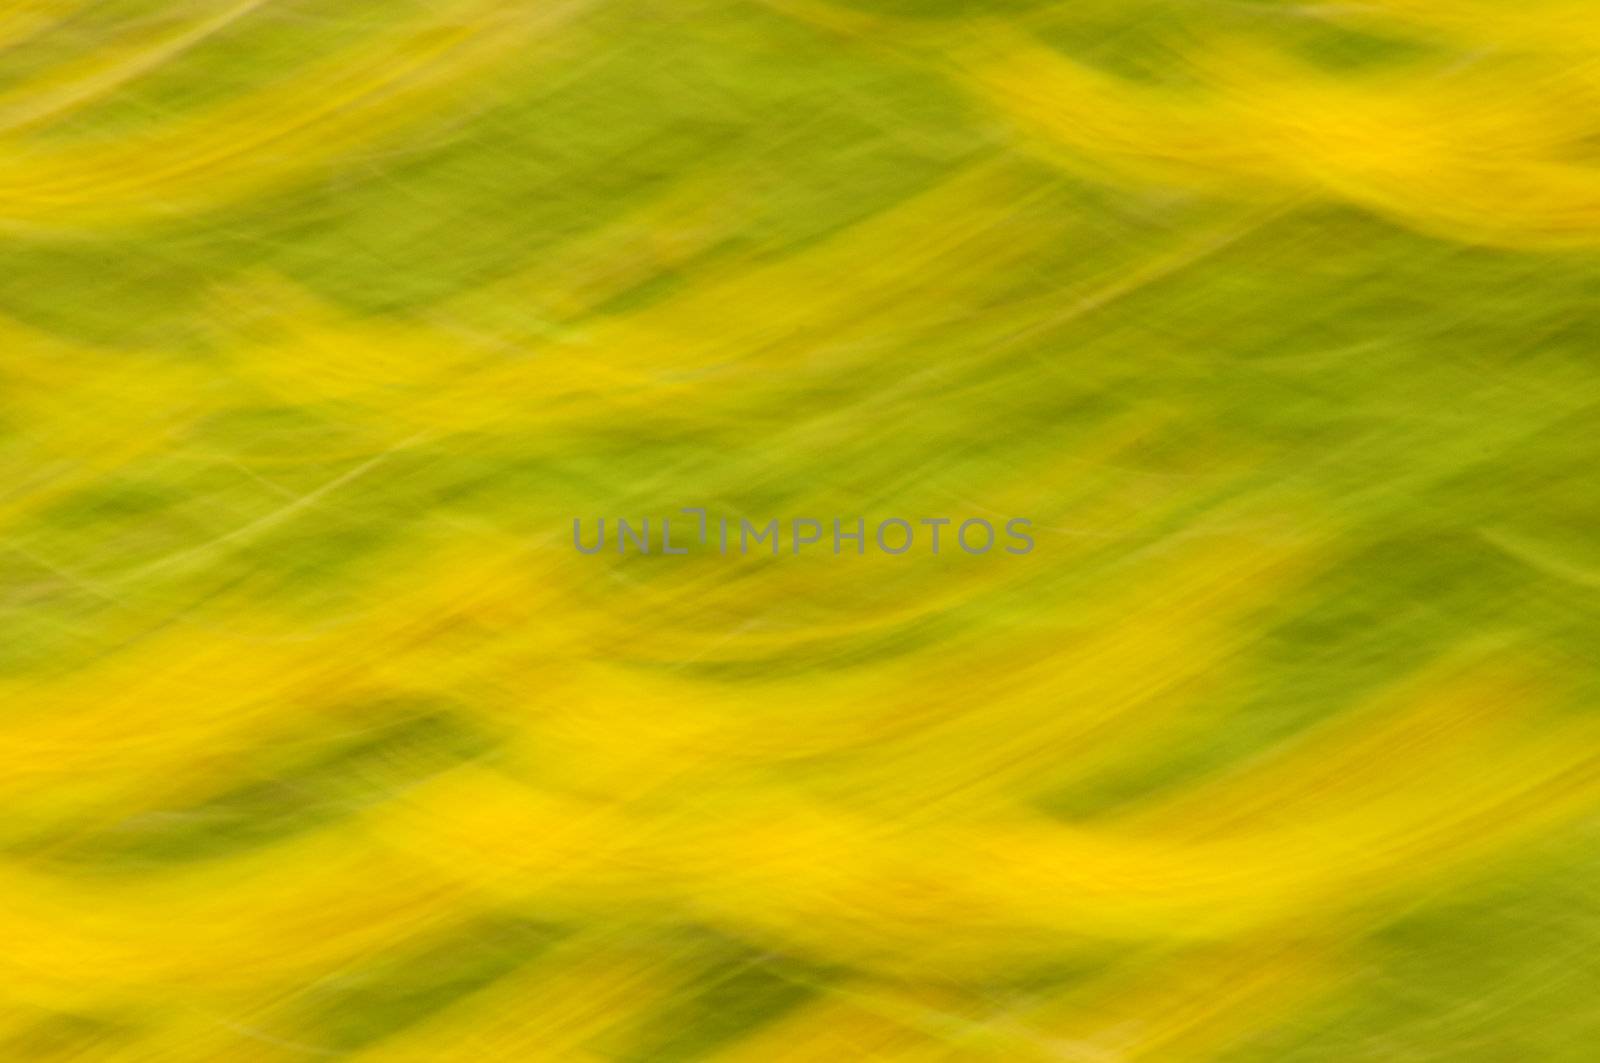 A green and yellow motion blur abstract texture by Talanis